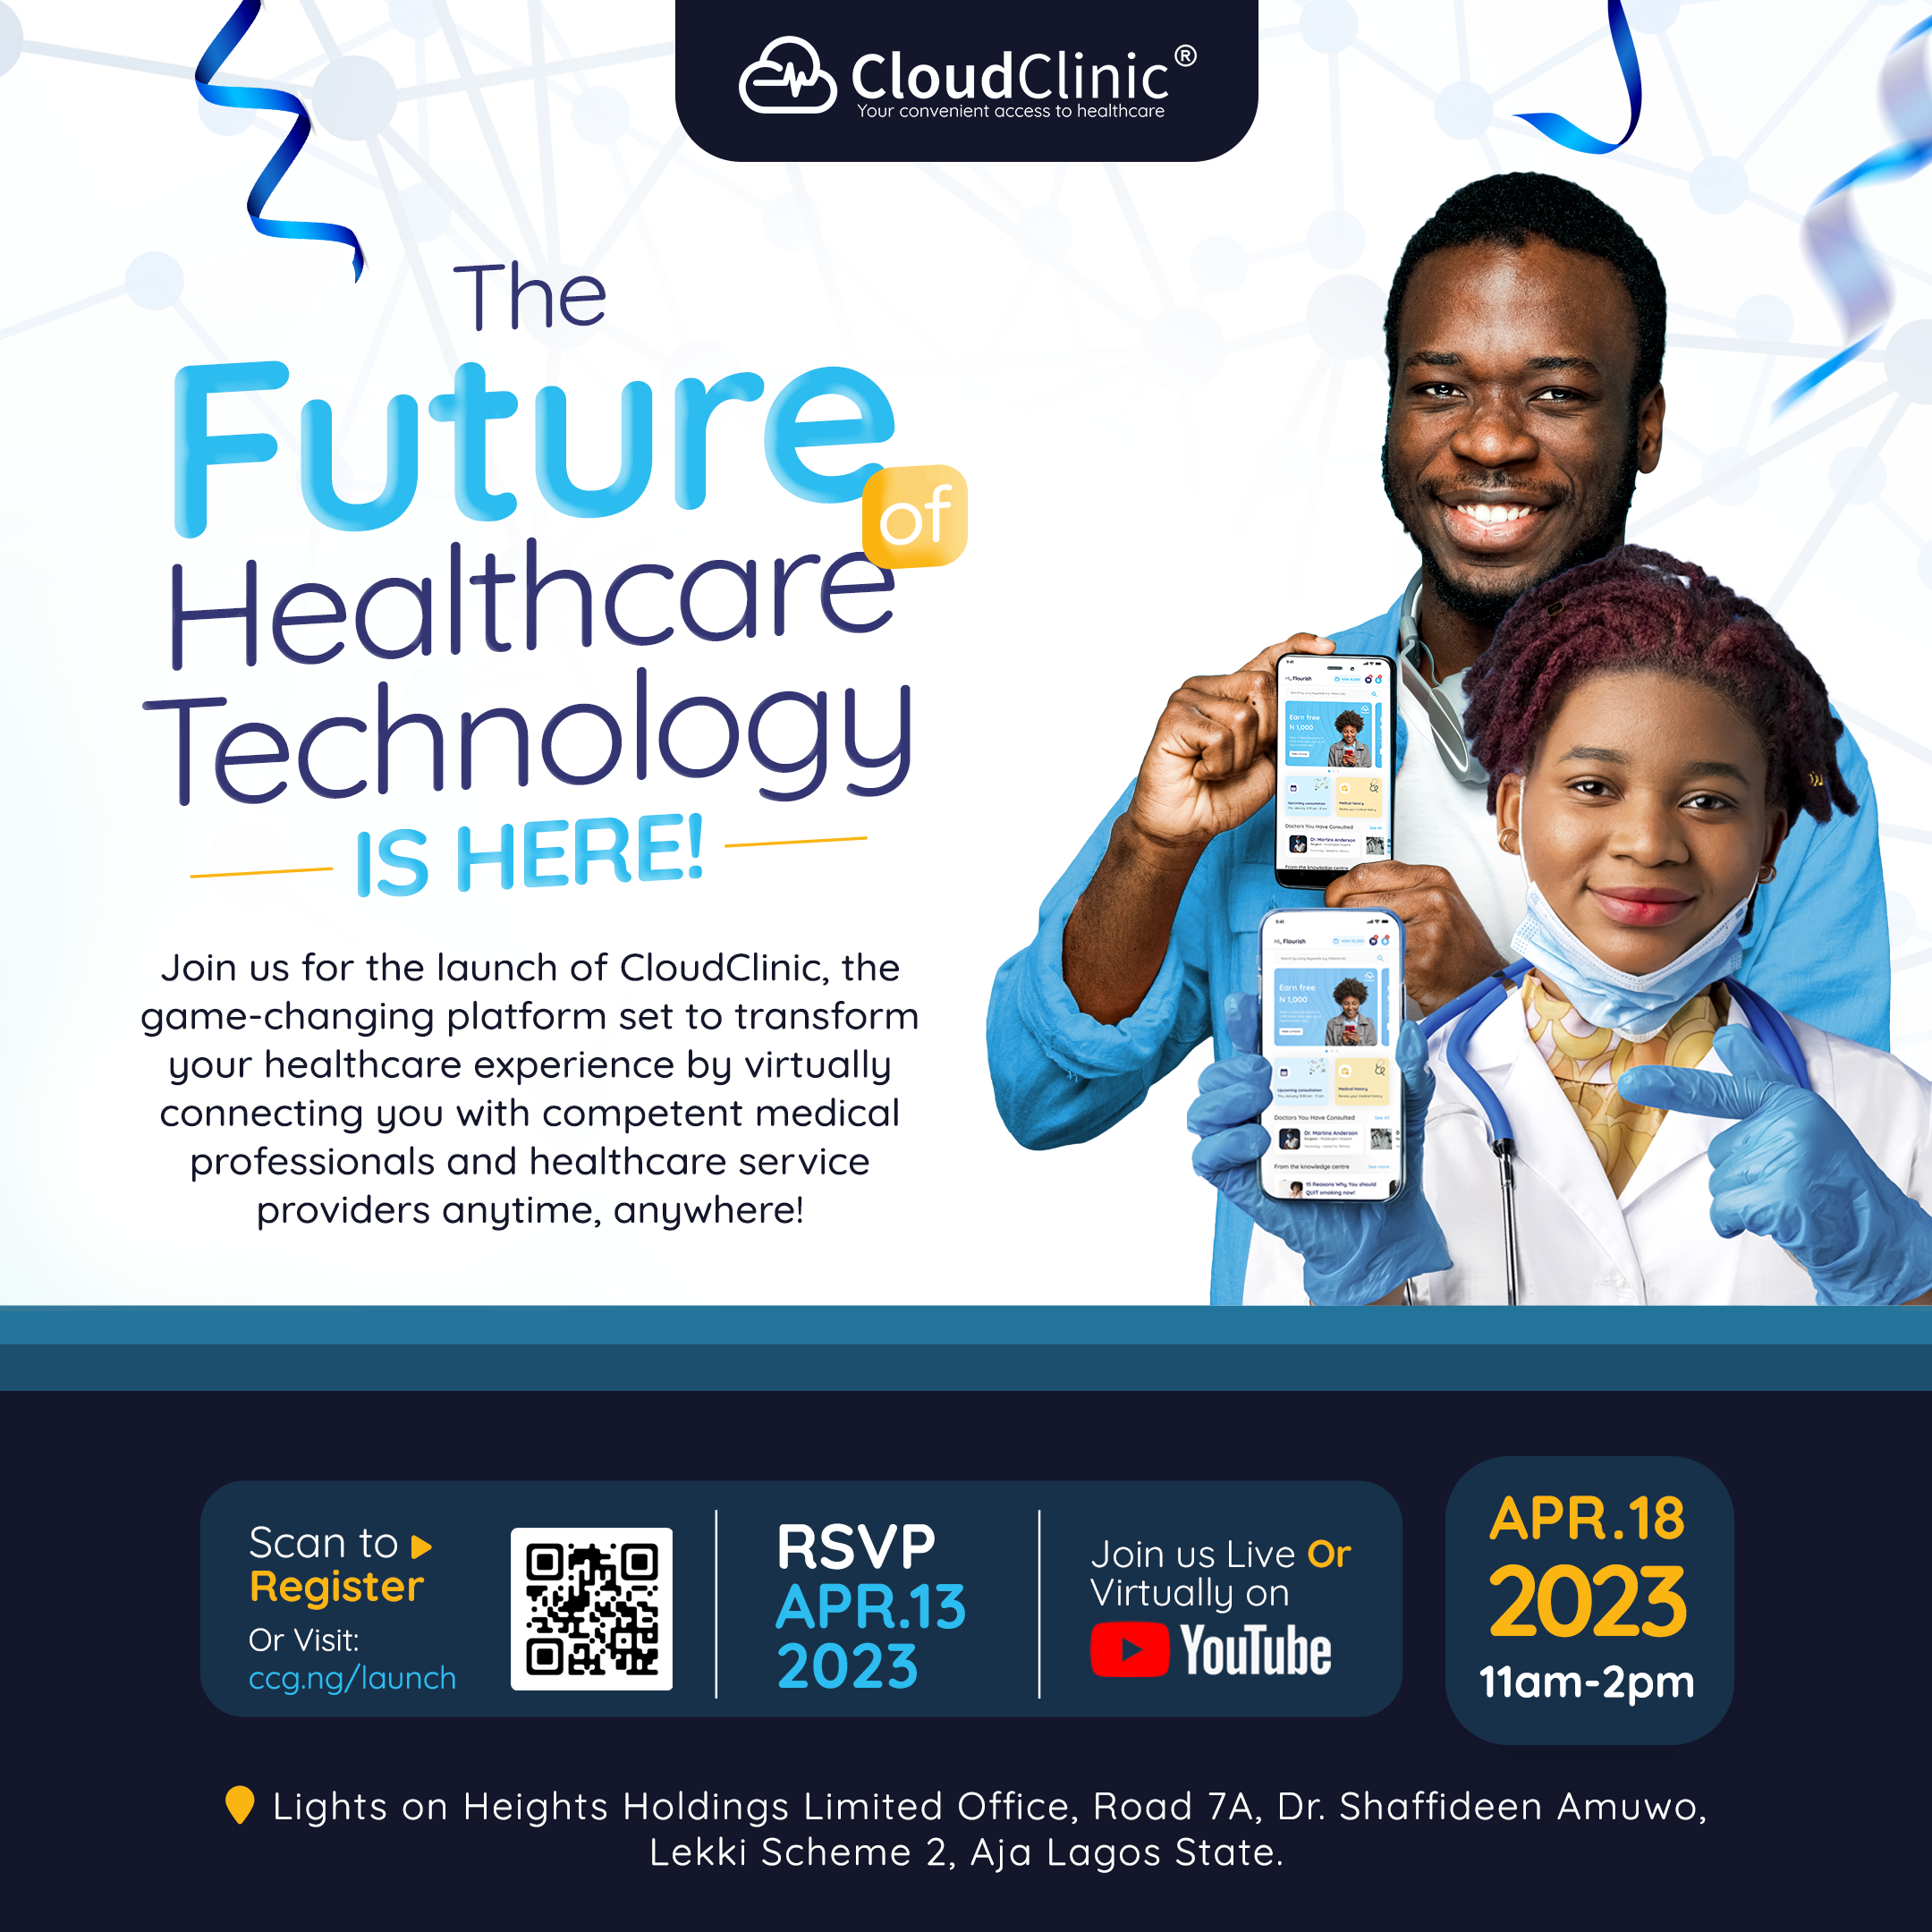 An Invitation to the CloudClinic Product Launch Event.